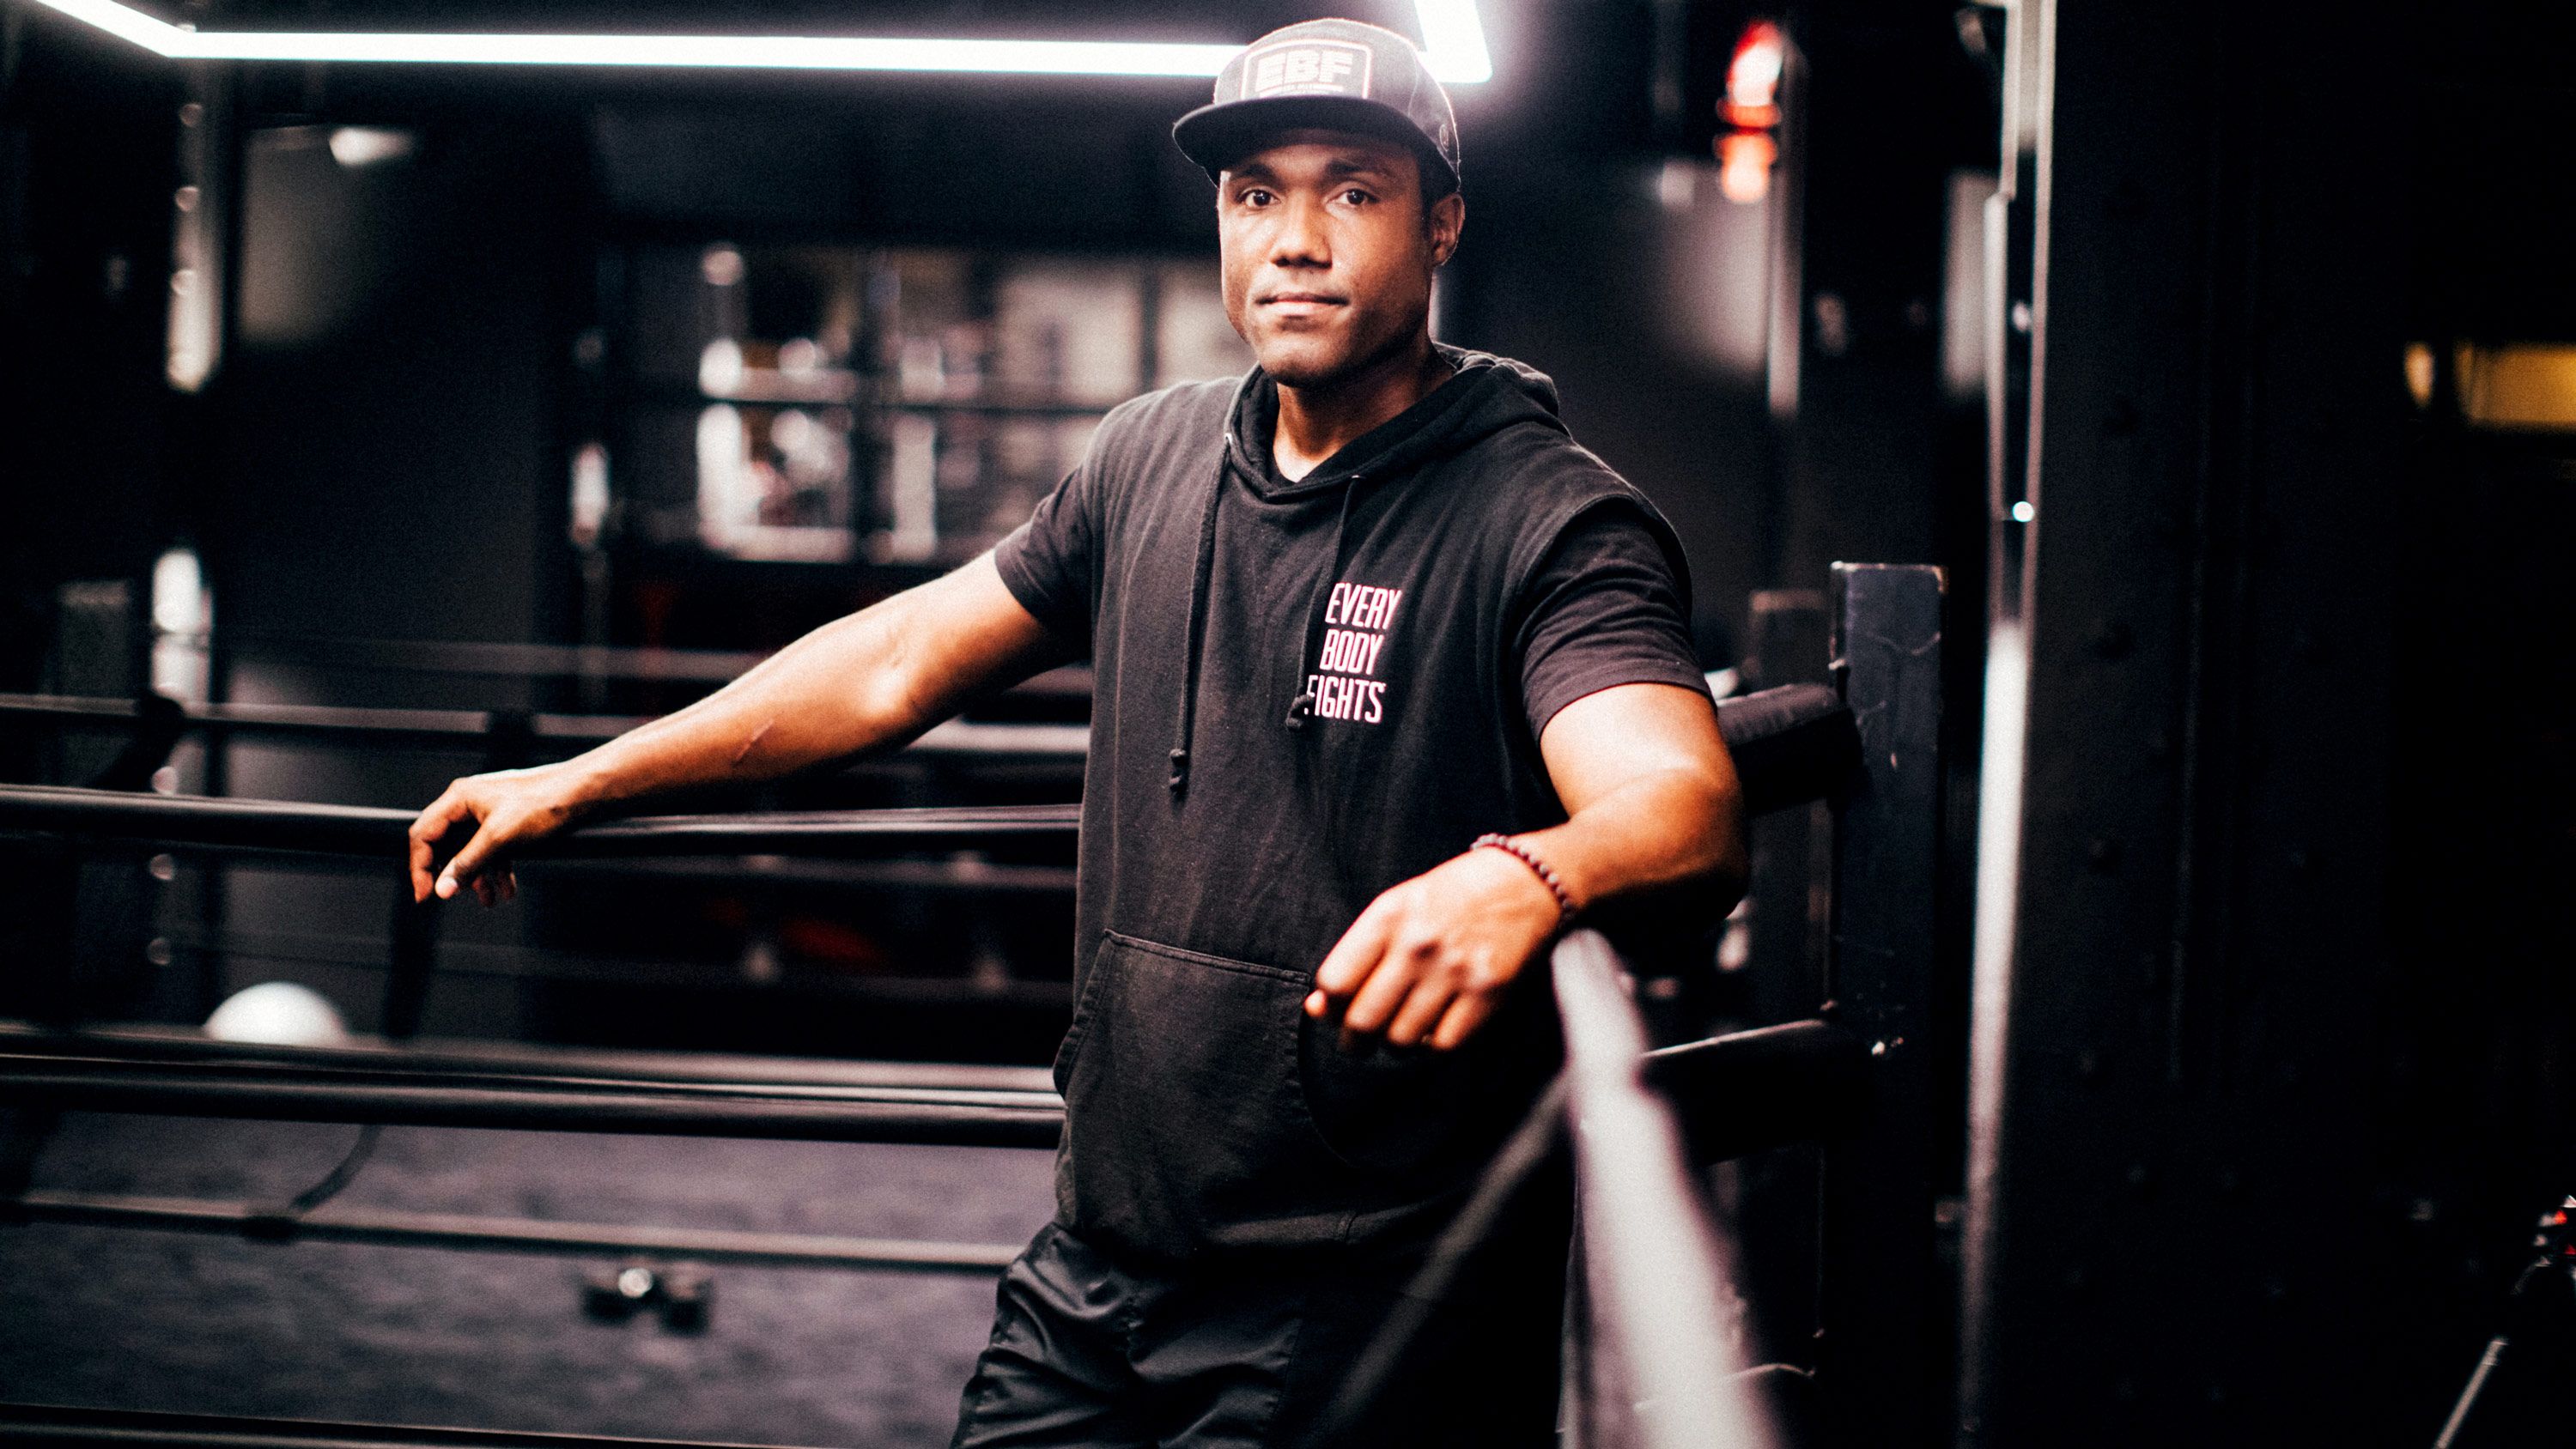 How George Foreman III Went from Managing His Father to Fitness Entrepreneur